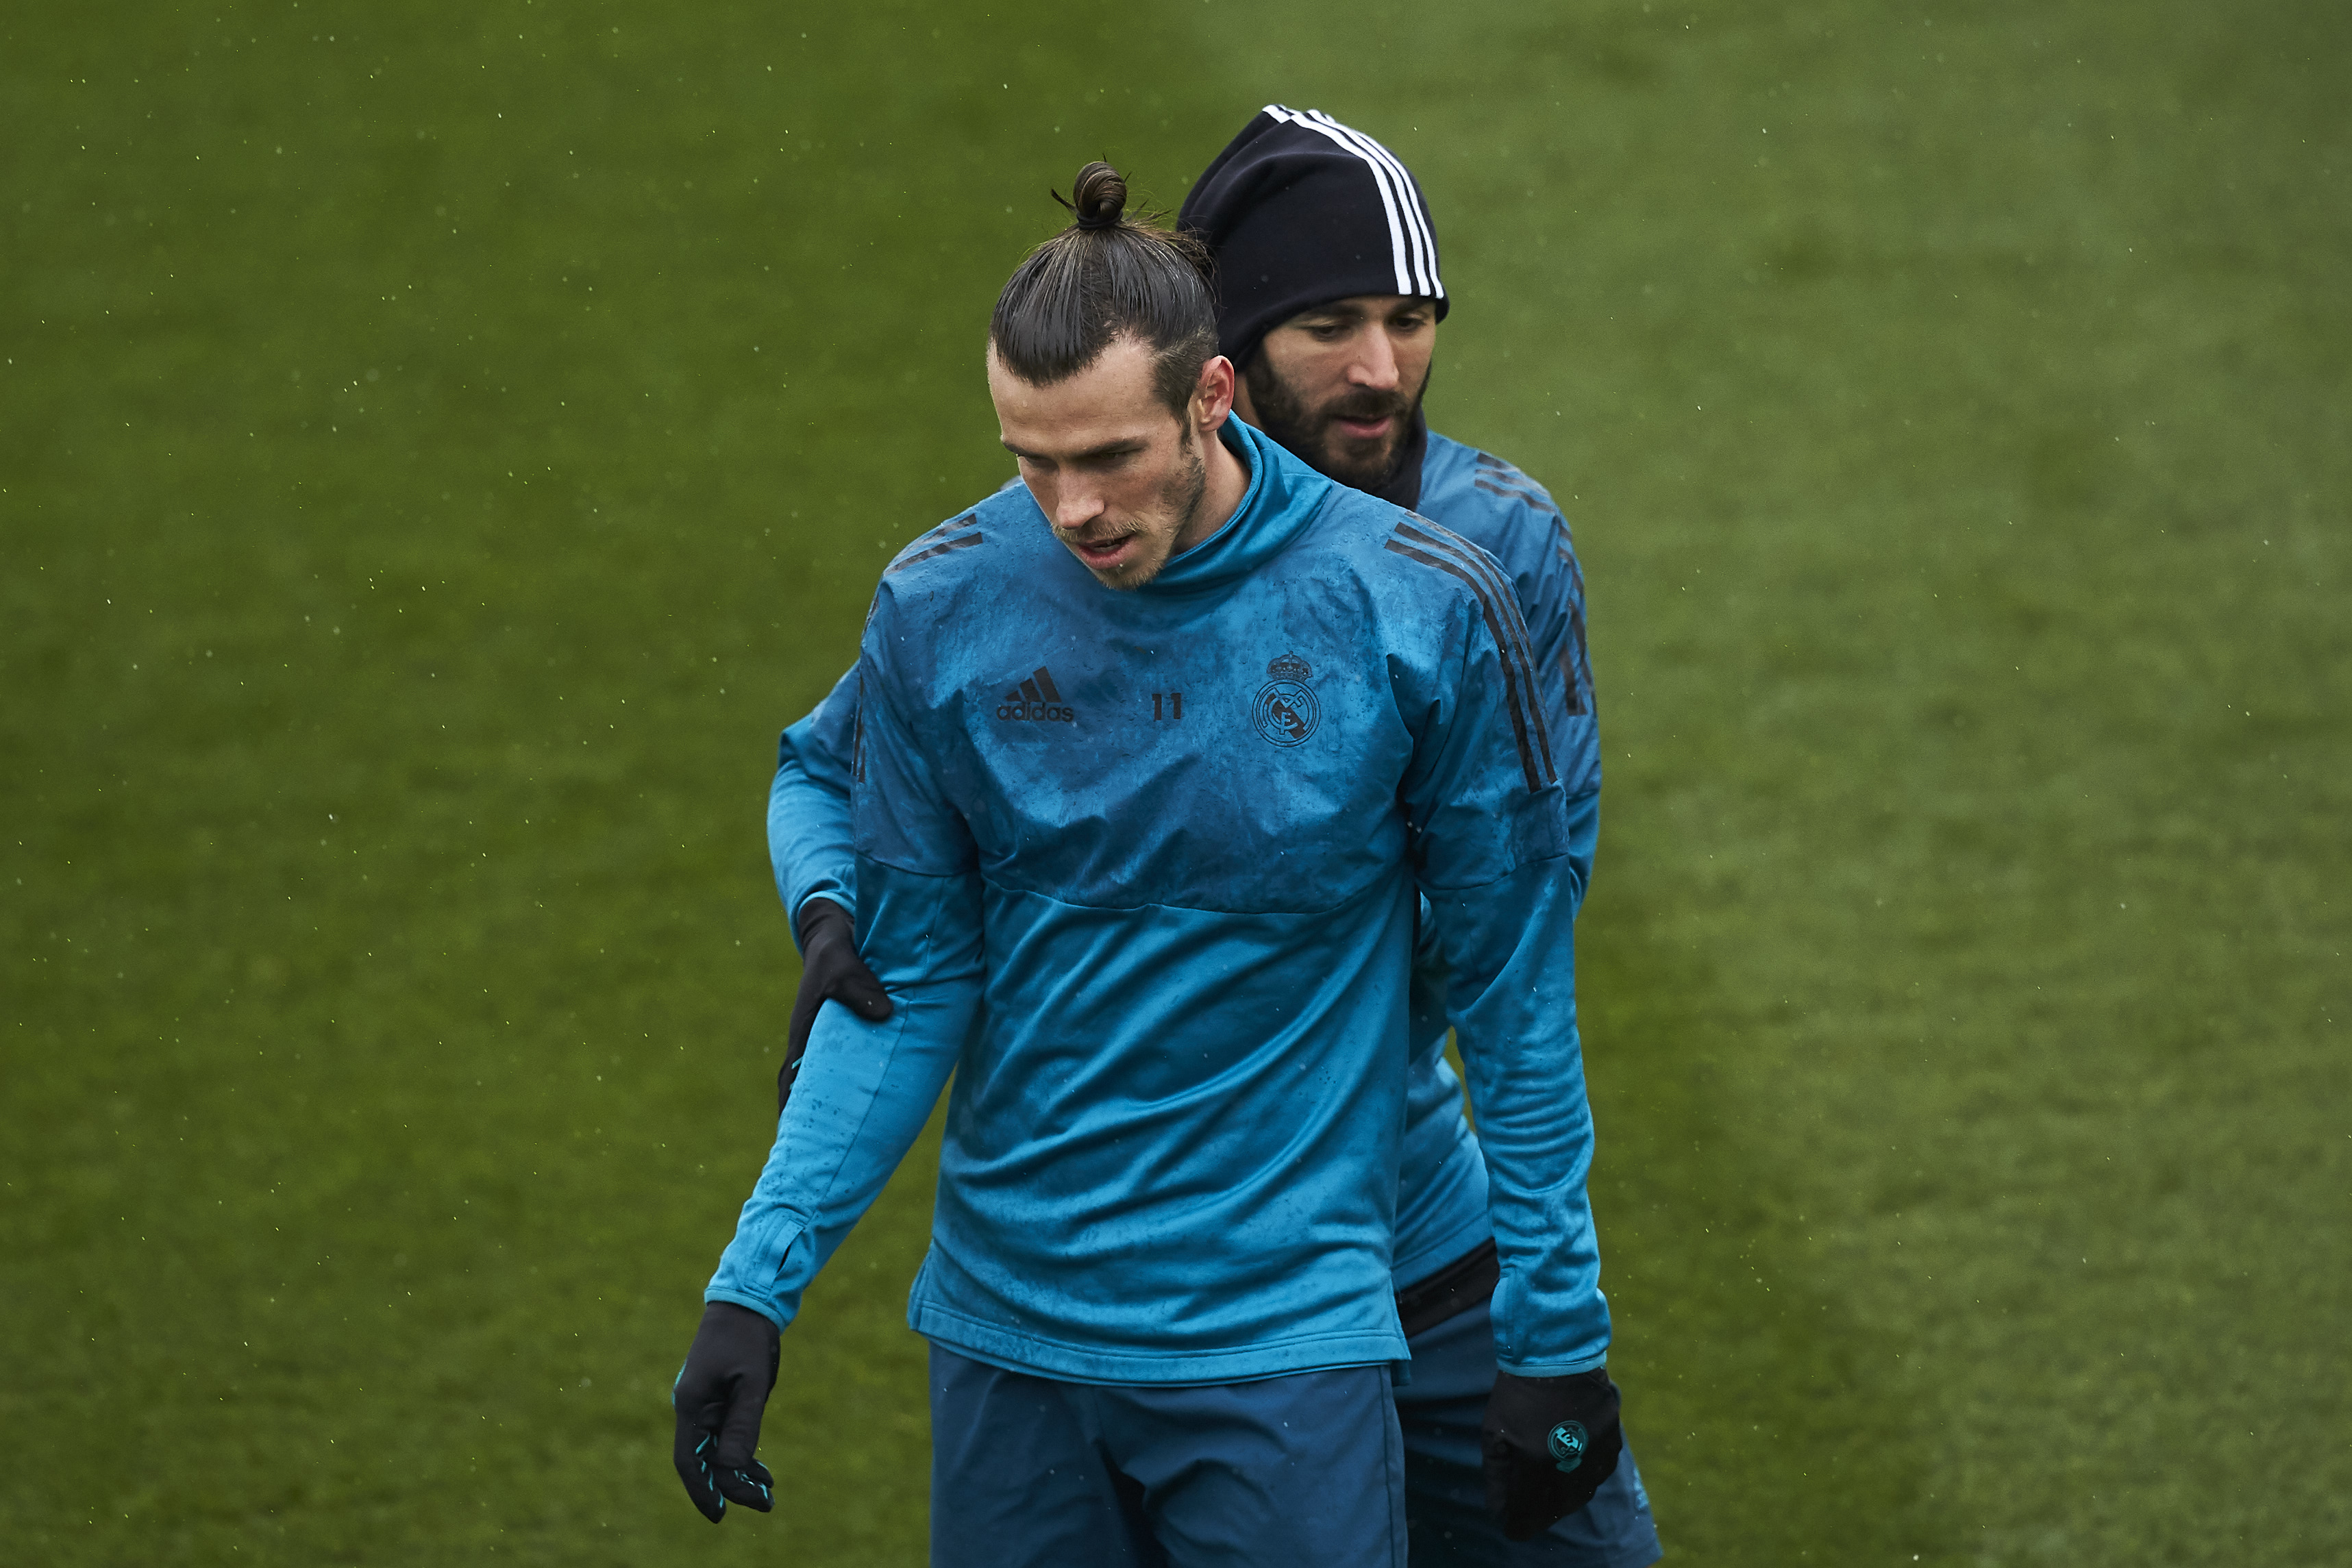 MADRID, SPAIN - APRIL 10: Karim Benzema (R) of Real Madrid CF hugs his teammate Gareth Bale during a training session ahead of their UEFA Champions LEague quarter final second leg match against Juventus at Valdebebas training ground on April 10, 2018 in Madrid, Spain. (Photo by Gonzalo Arroyo Moreno/Getty Images)